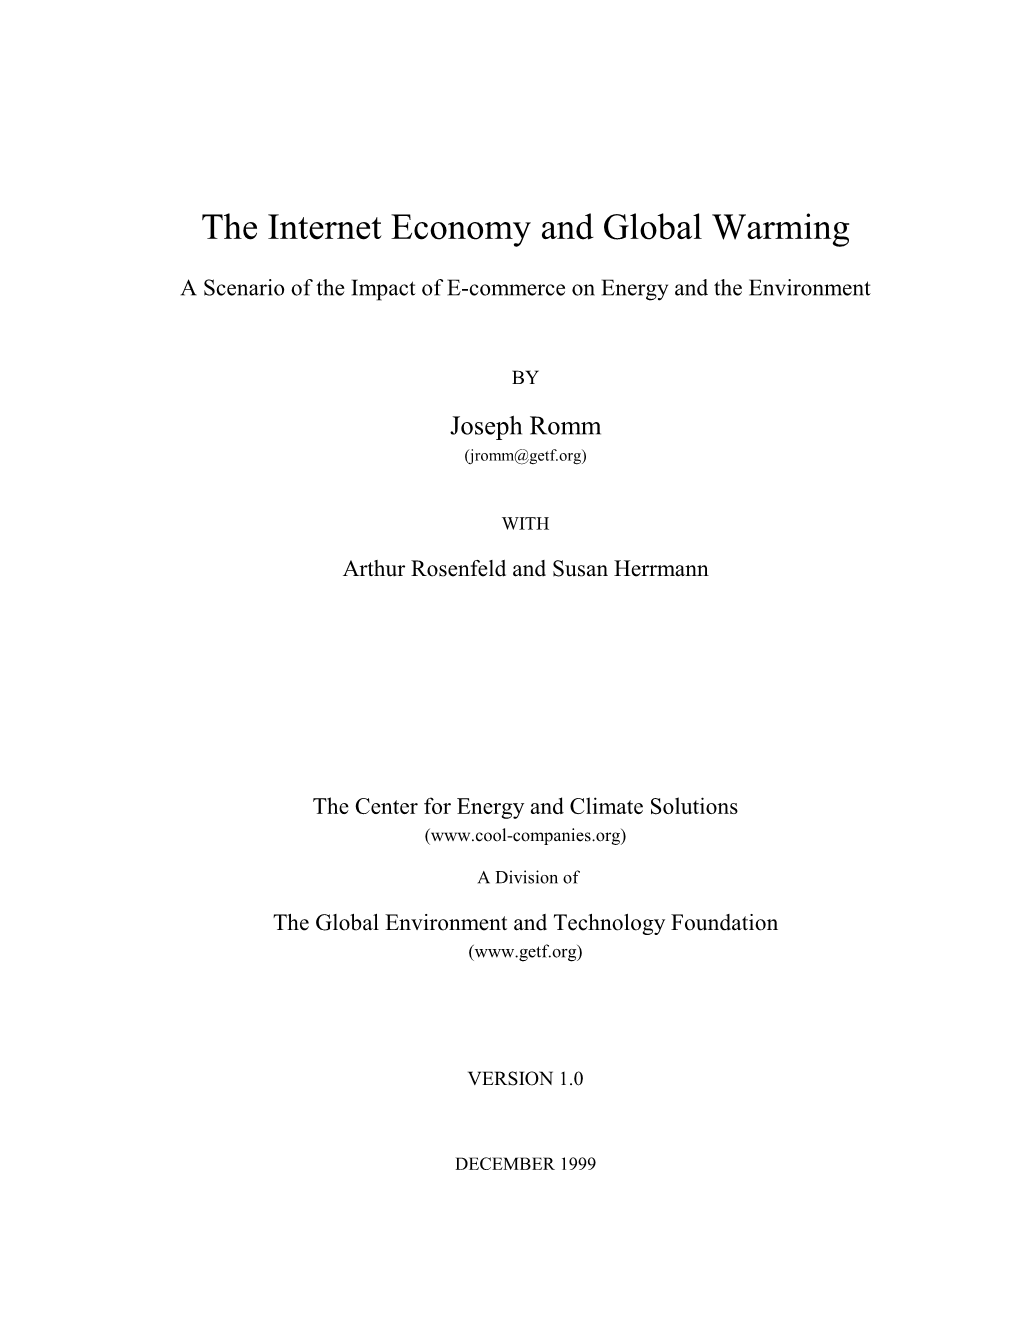 The Internet Economy and Global Warming